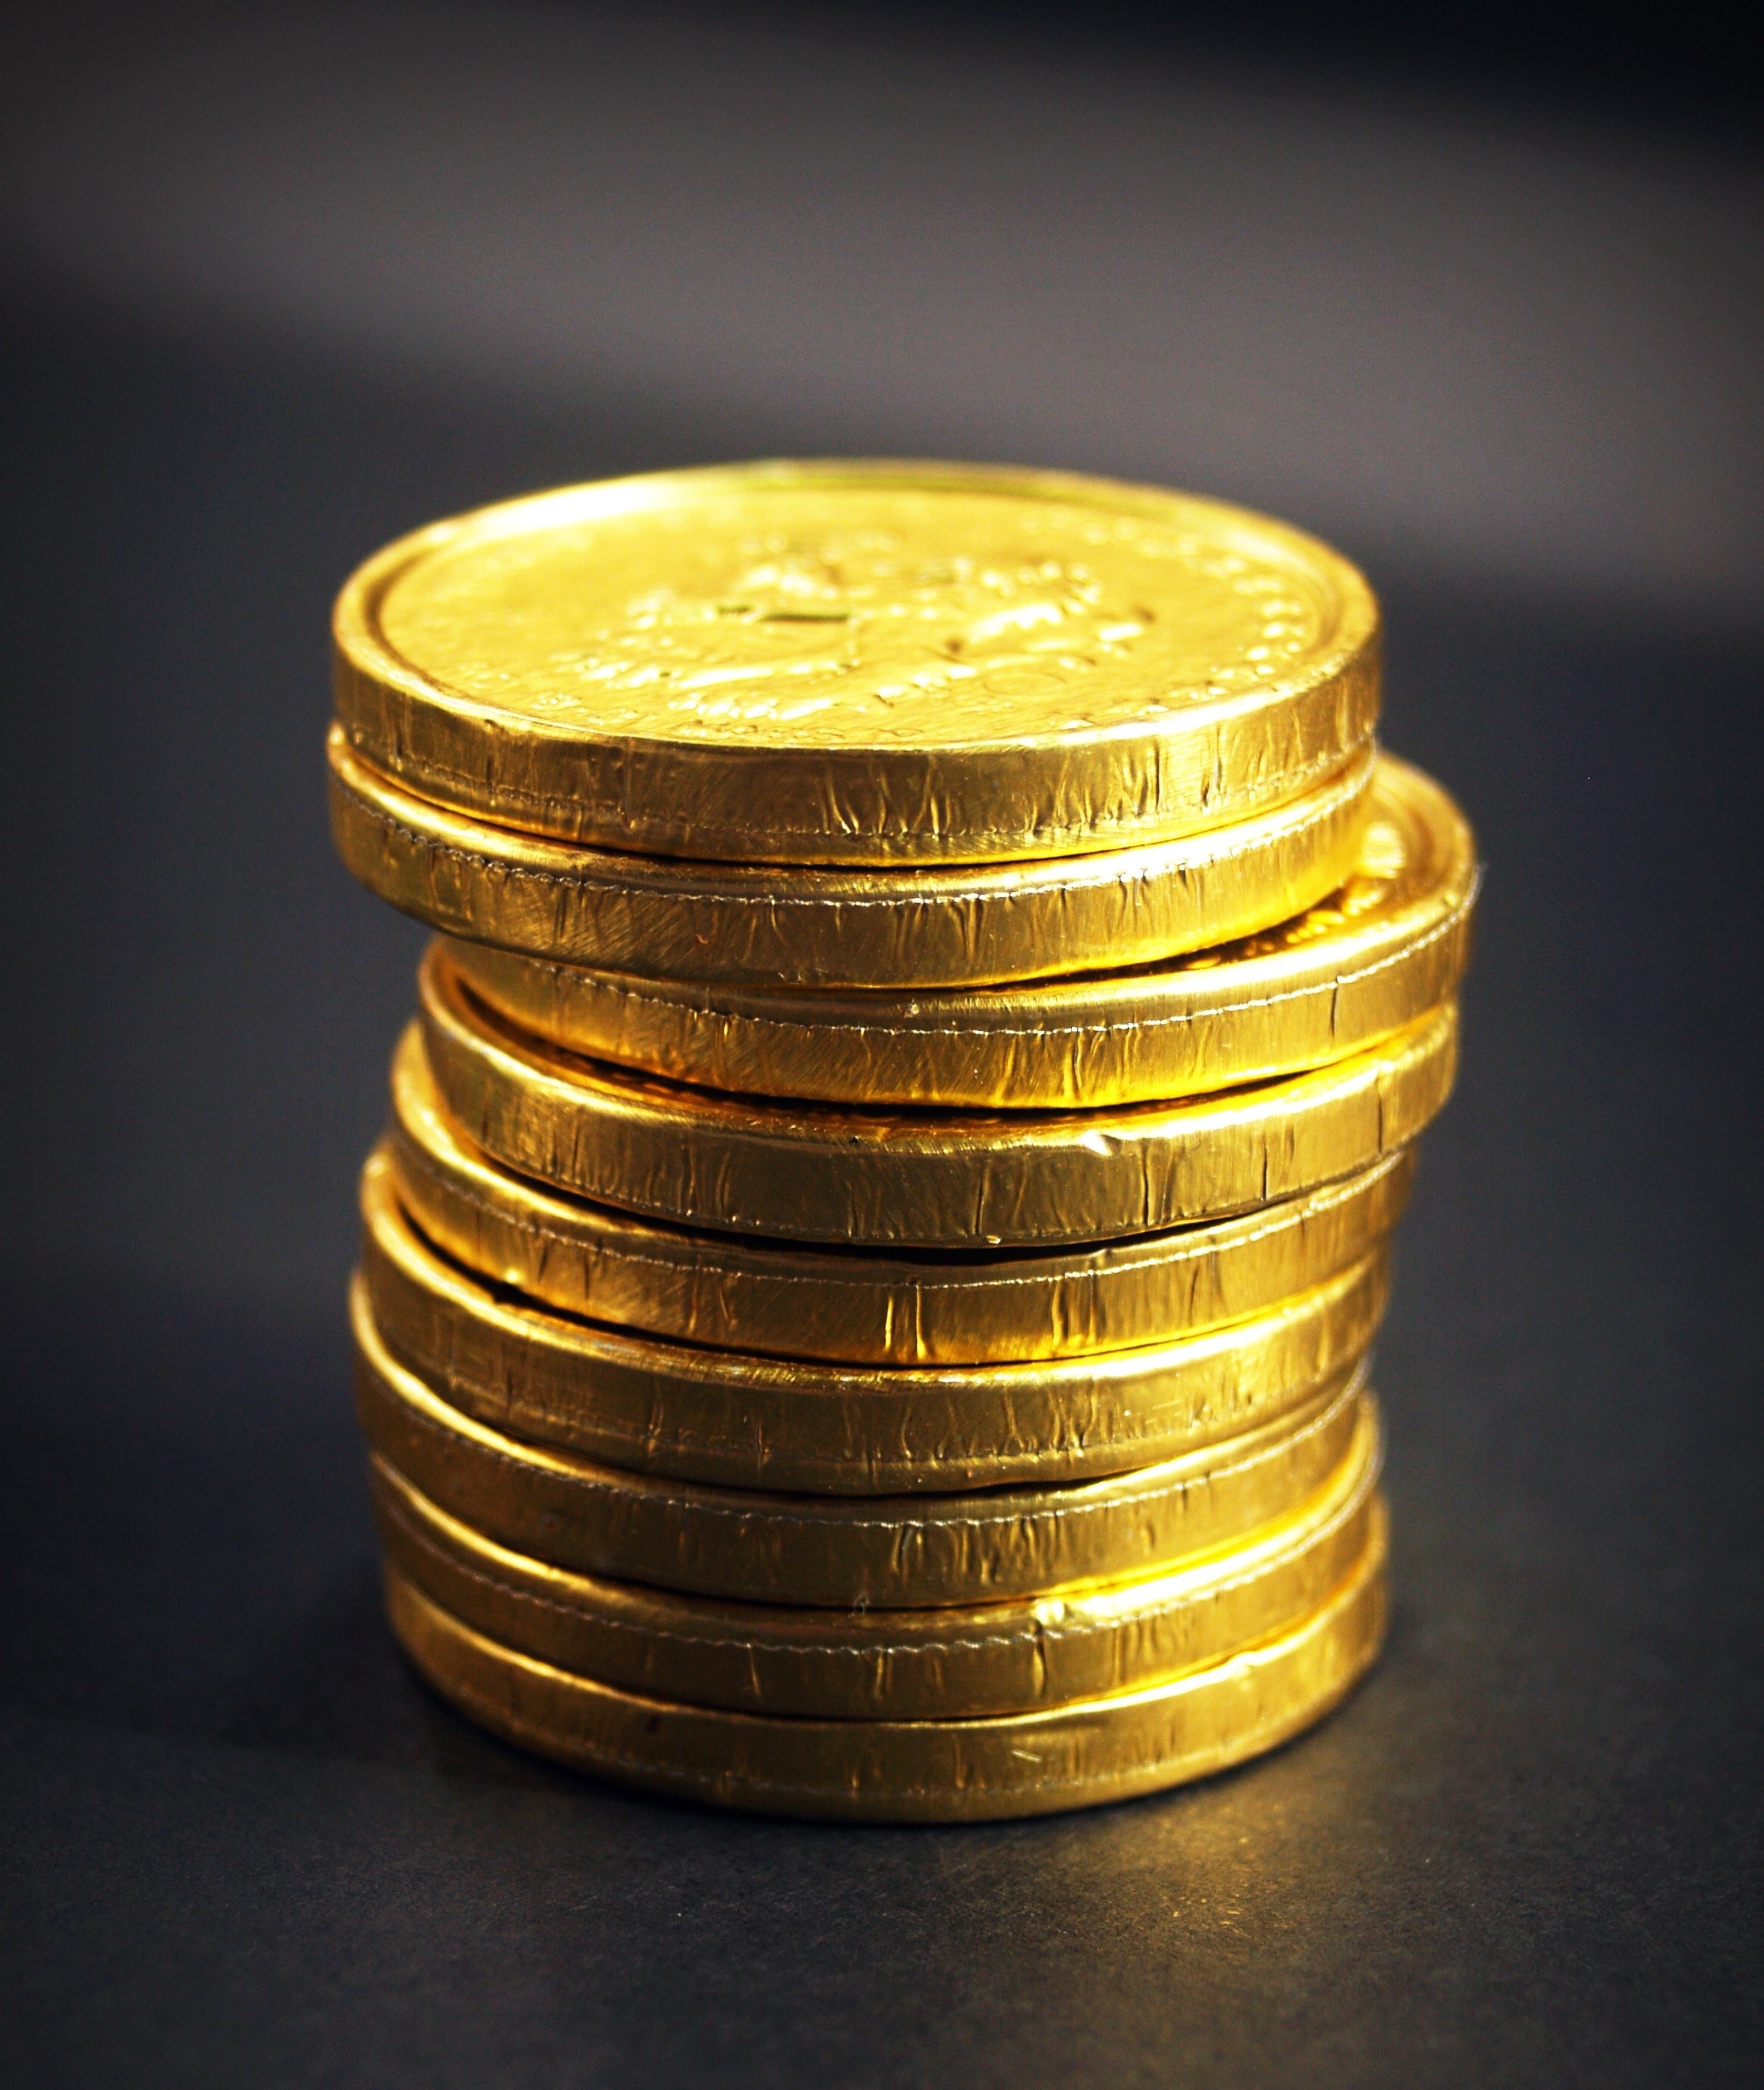 9 chocolate gold coins free image - Peakpx